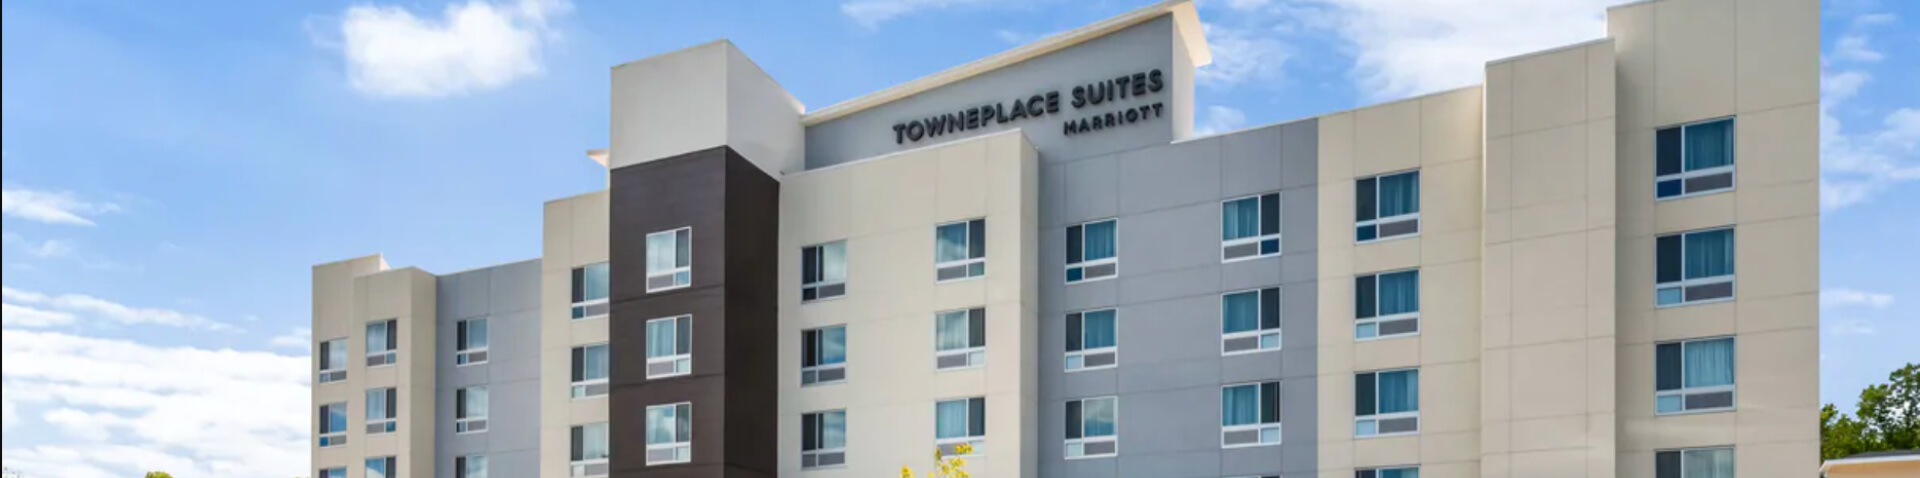 exterior of Towneplace Suites